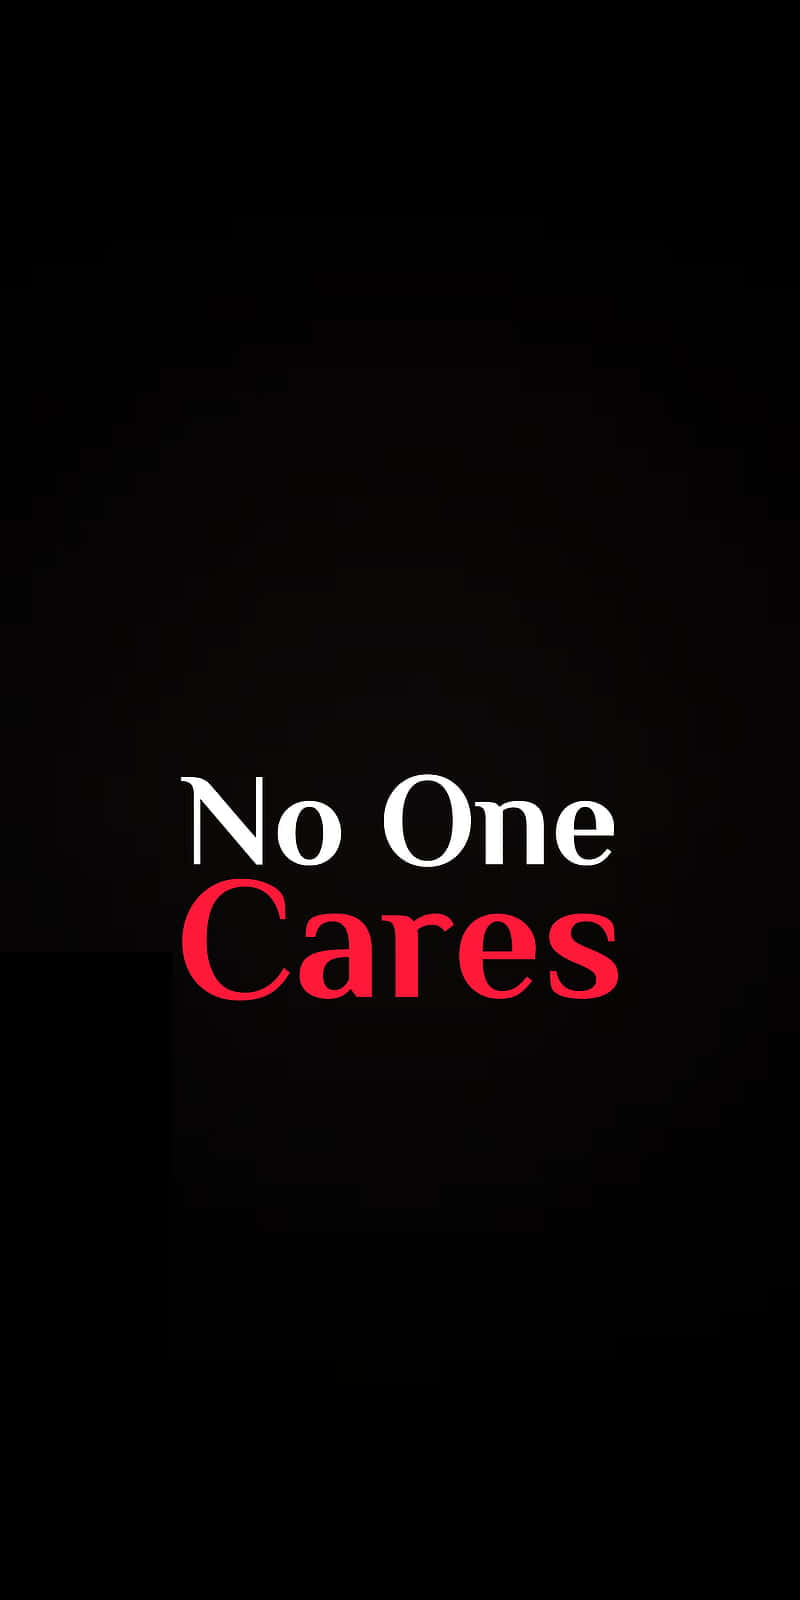 No One Cares - A Black Background With Red Text Background